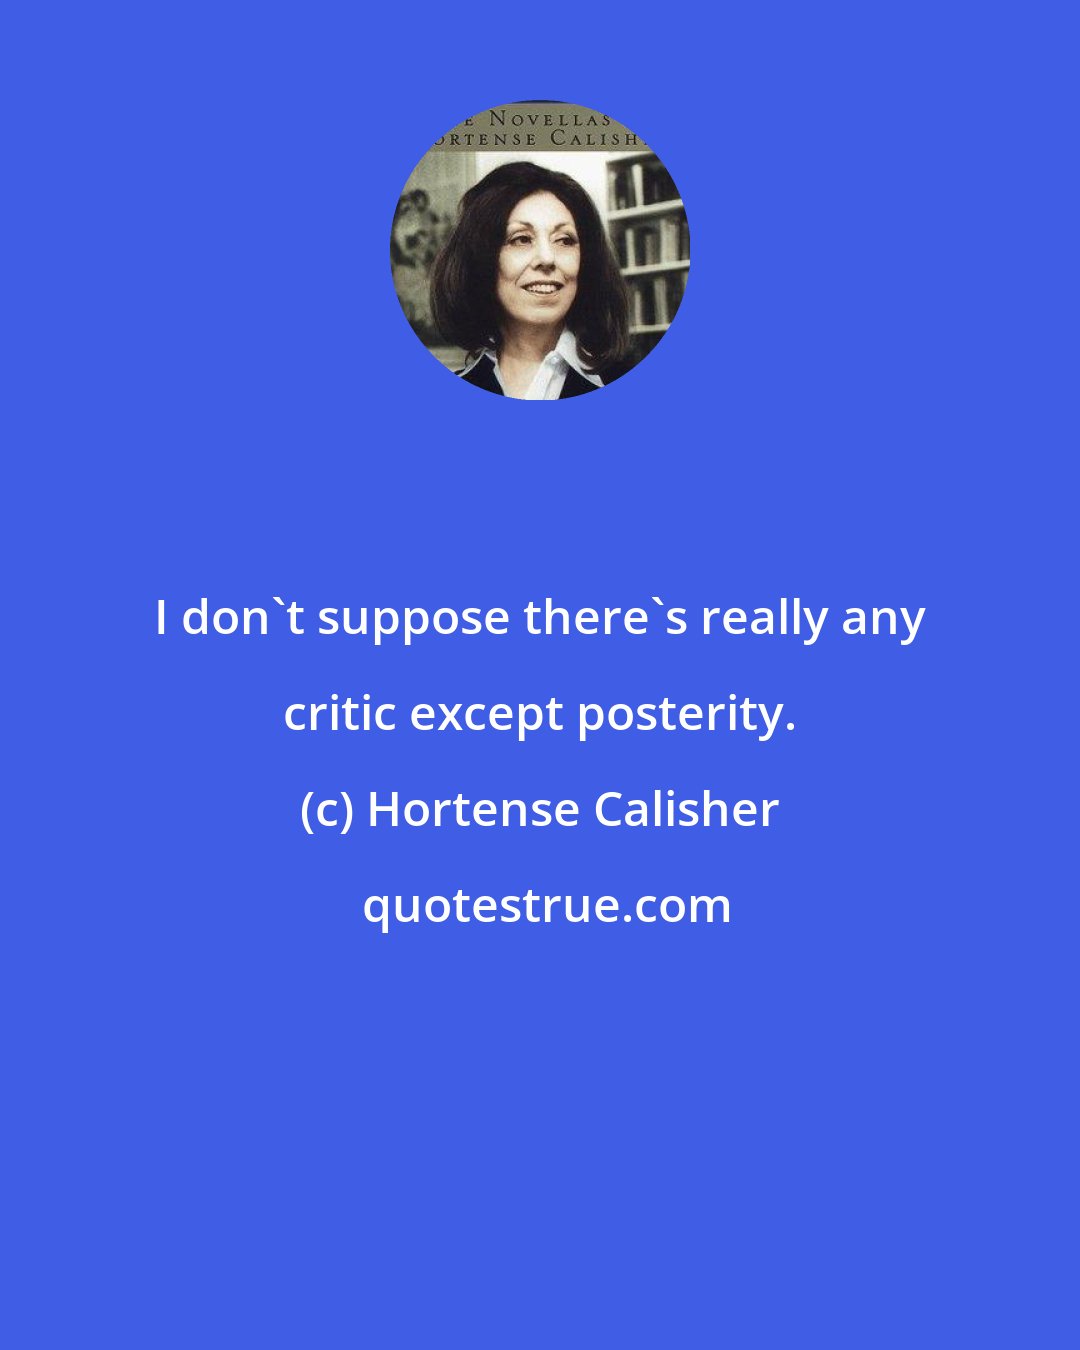 Hortense Calisher: I don't suppose there's really any critic except posterity.